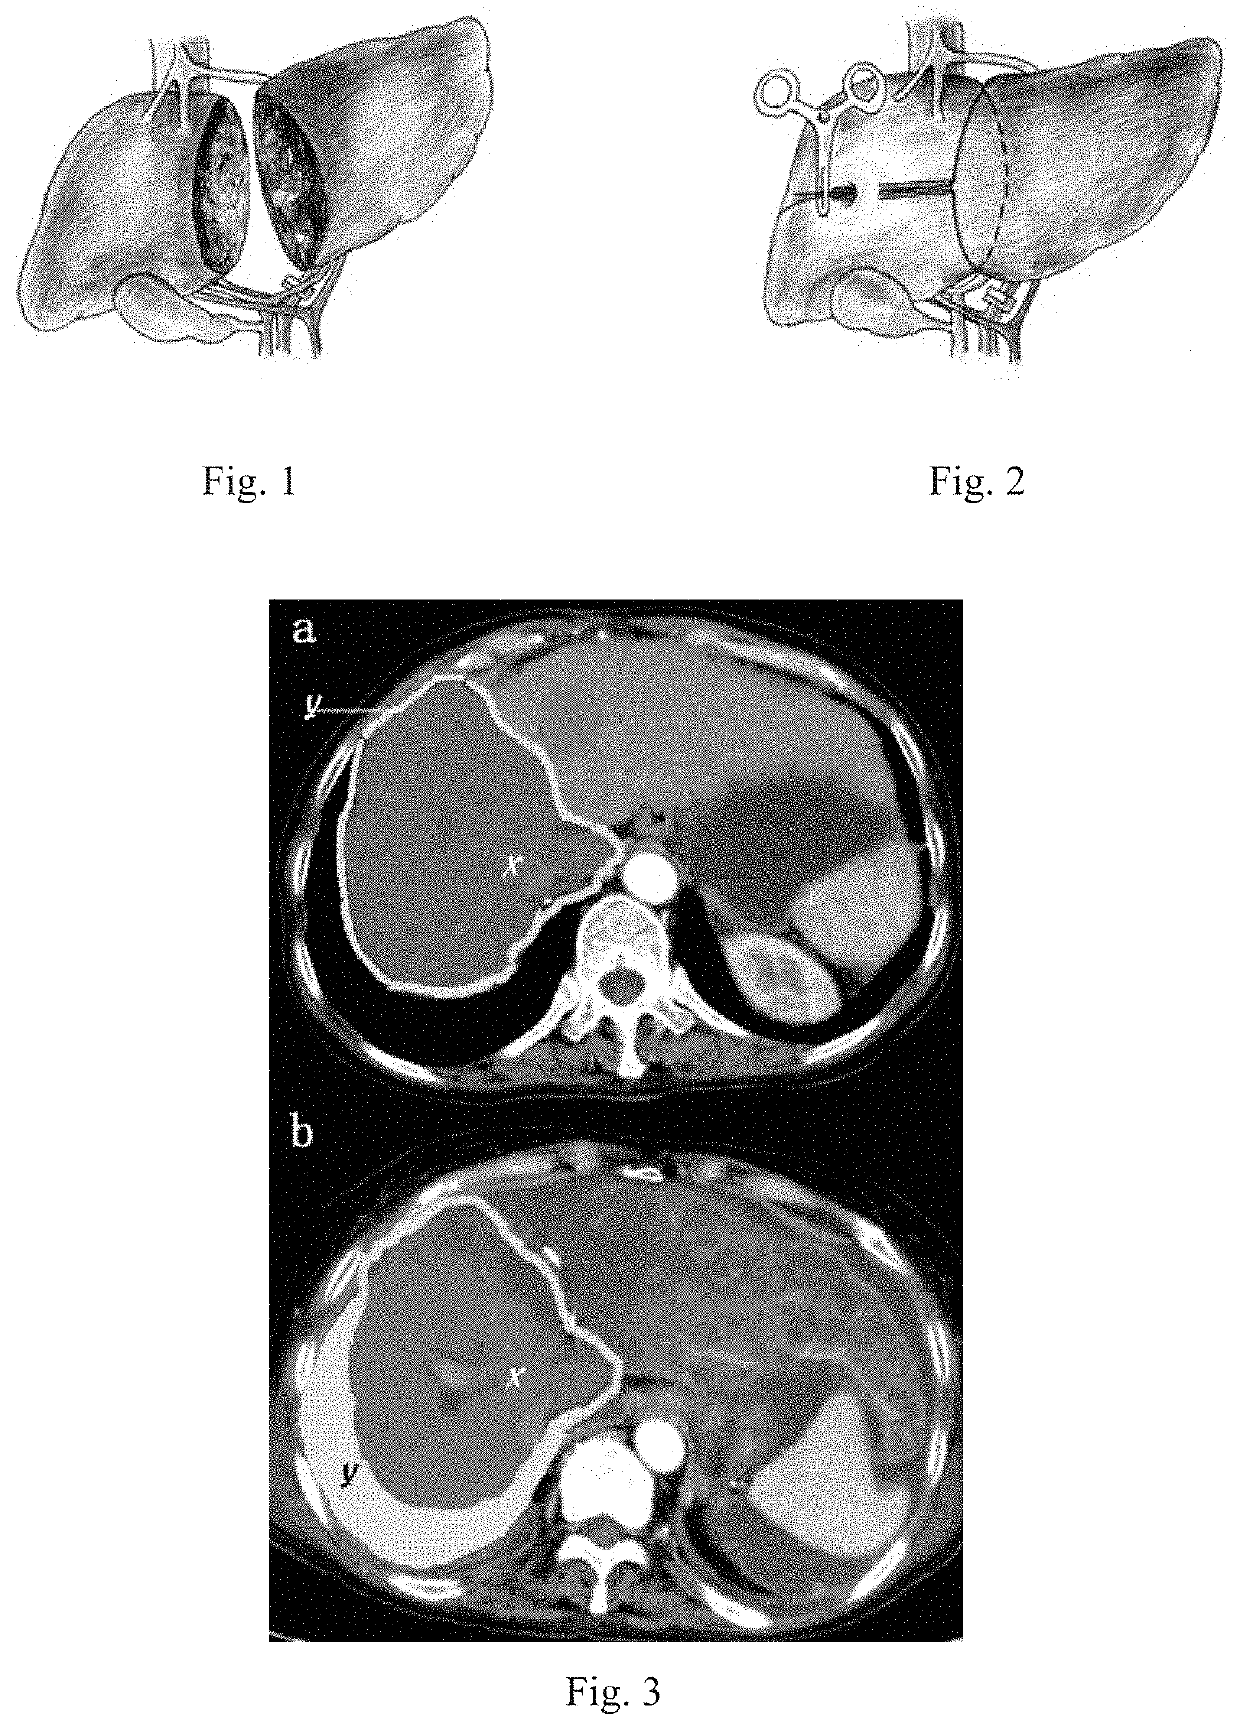 Completely laparoscopic staged hepatectomy using round-the-liver ligation and its instrument